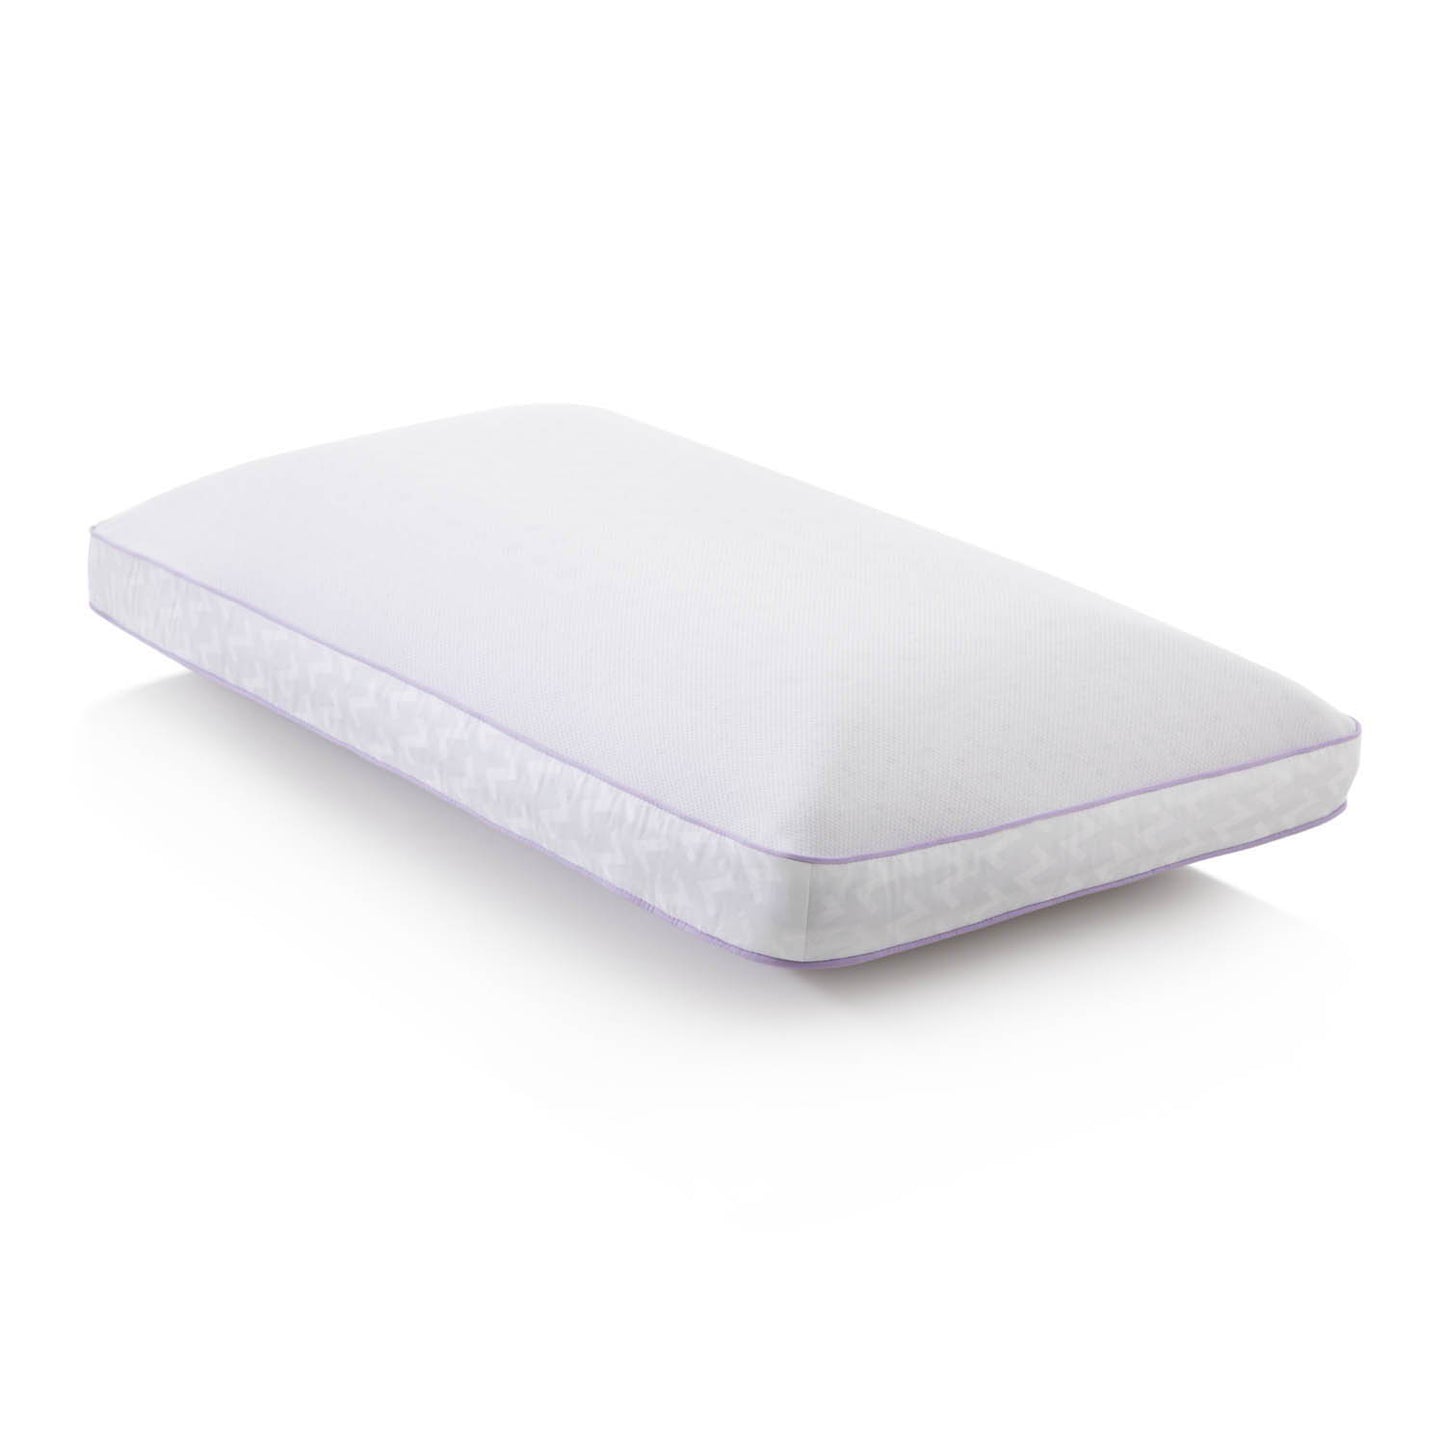 Zoned - Dough® Lavender With Spritzer Pillow - Travel Neck